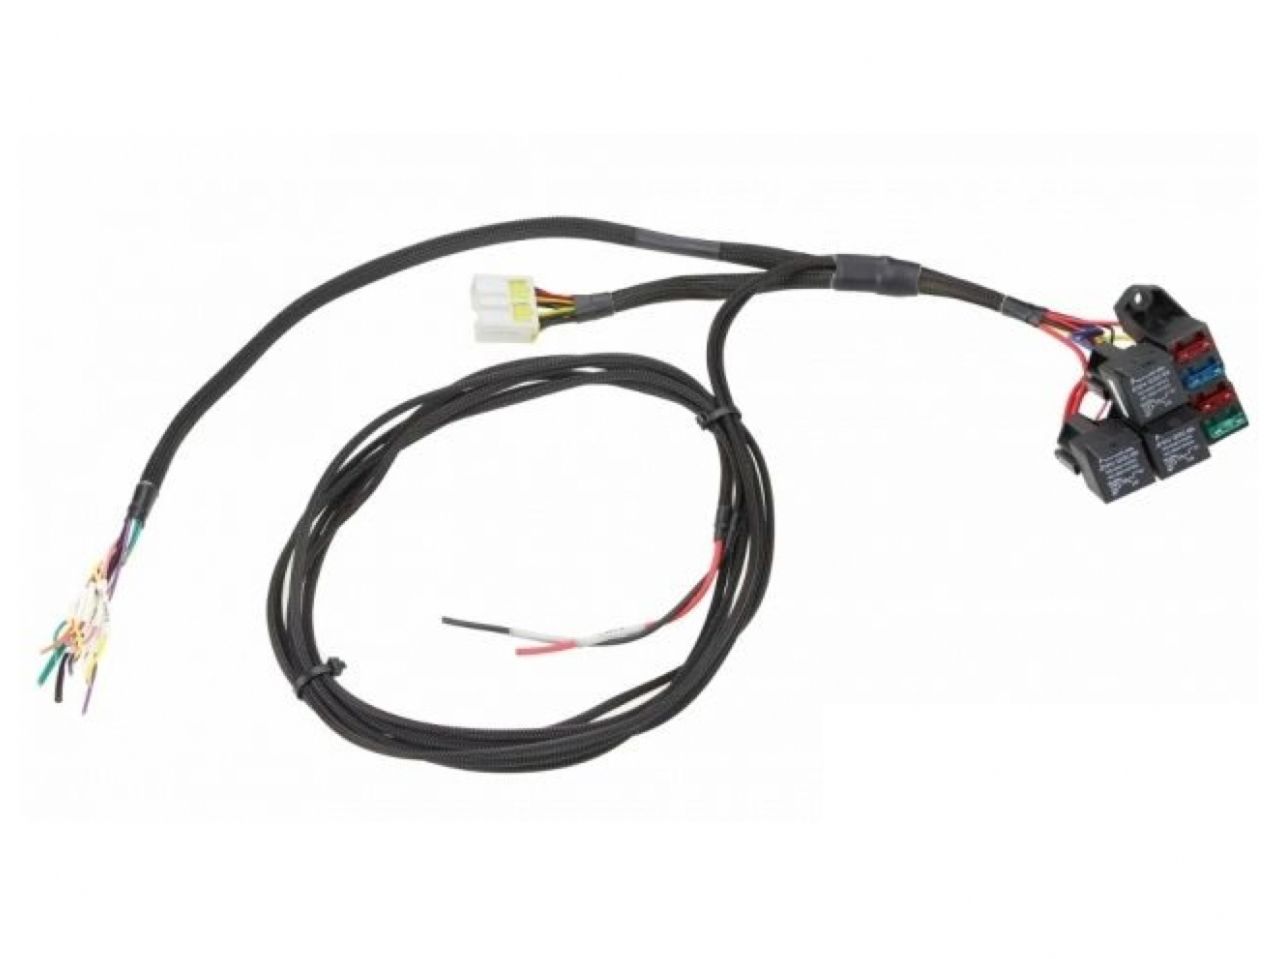 Wiring Specialties Universal / Standalone Wiring Harness for RB25DET - PRO SERIES